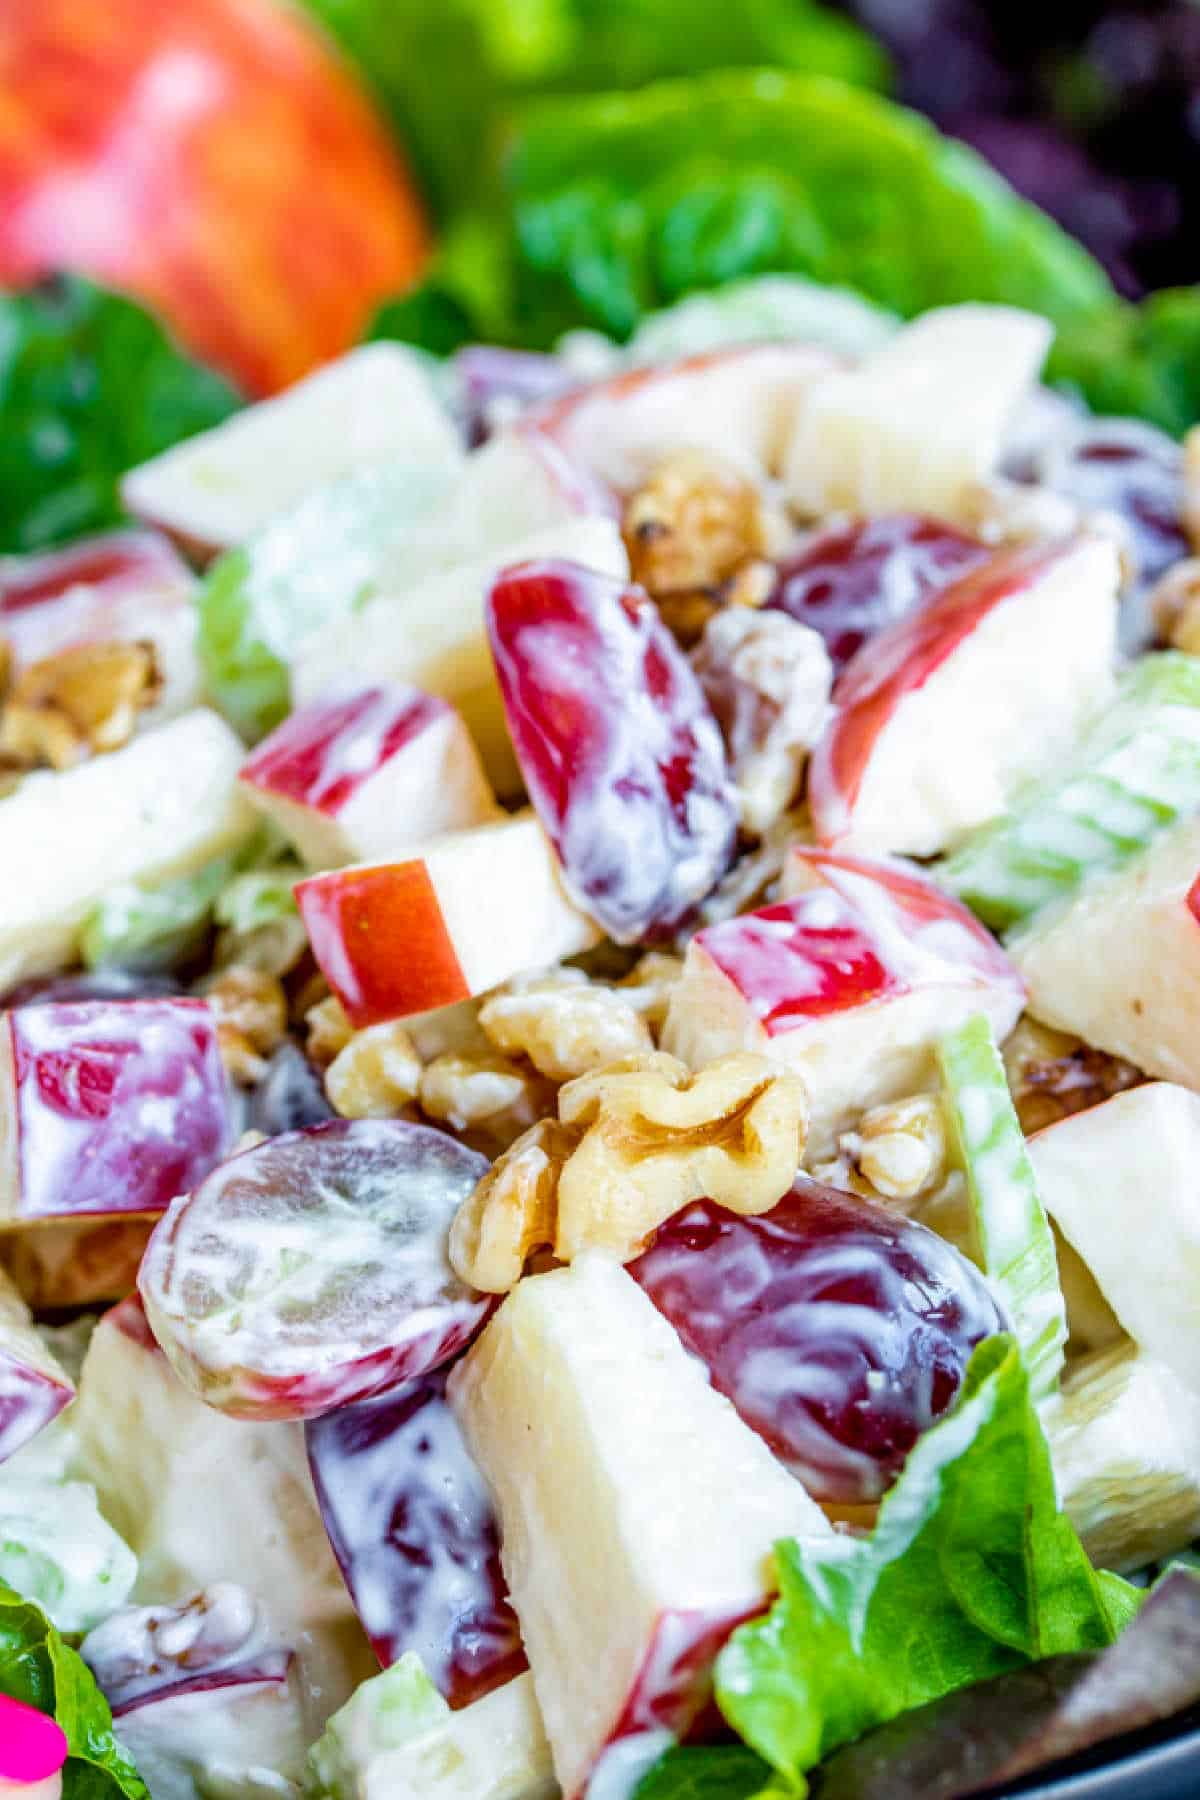 Waldorf Salad made with apples, grapes and walnuts